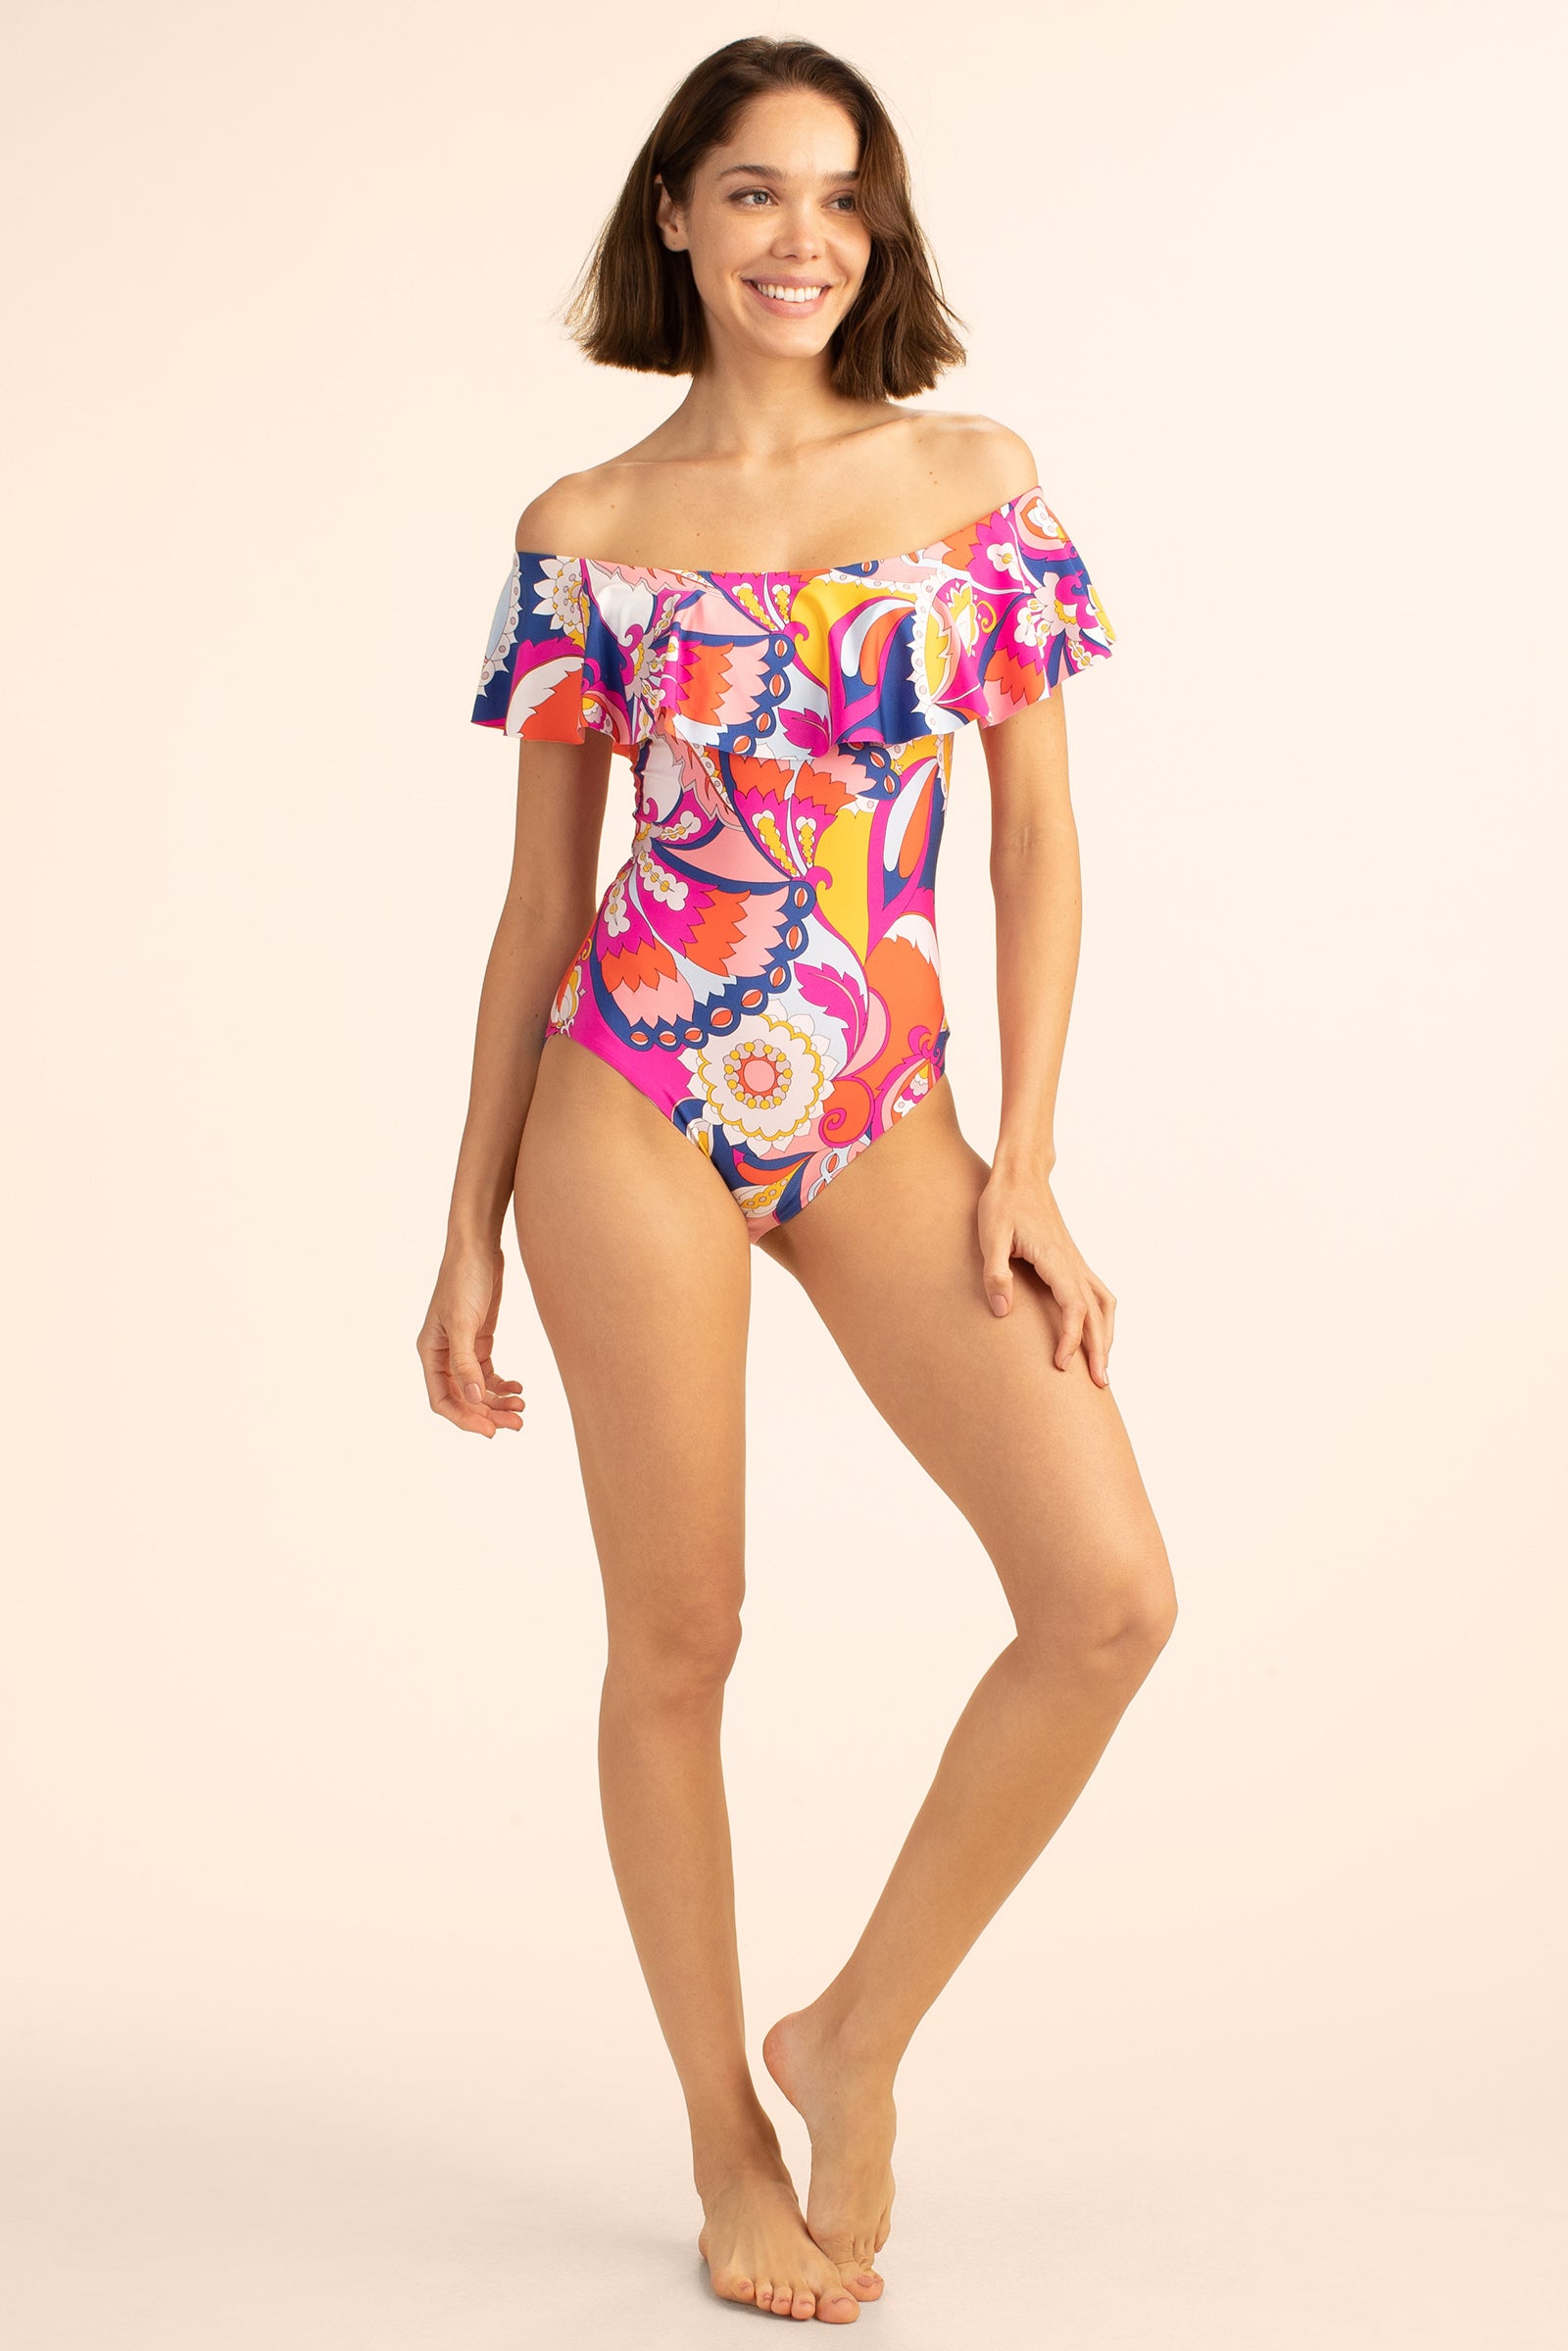 Fashion Look Featuring Trina Turk Two Piece Swimsuits and Splendid